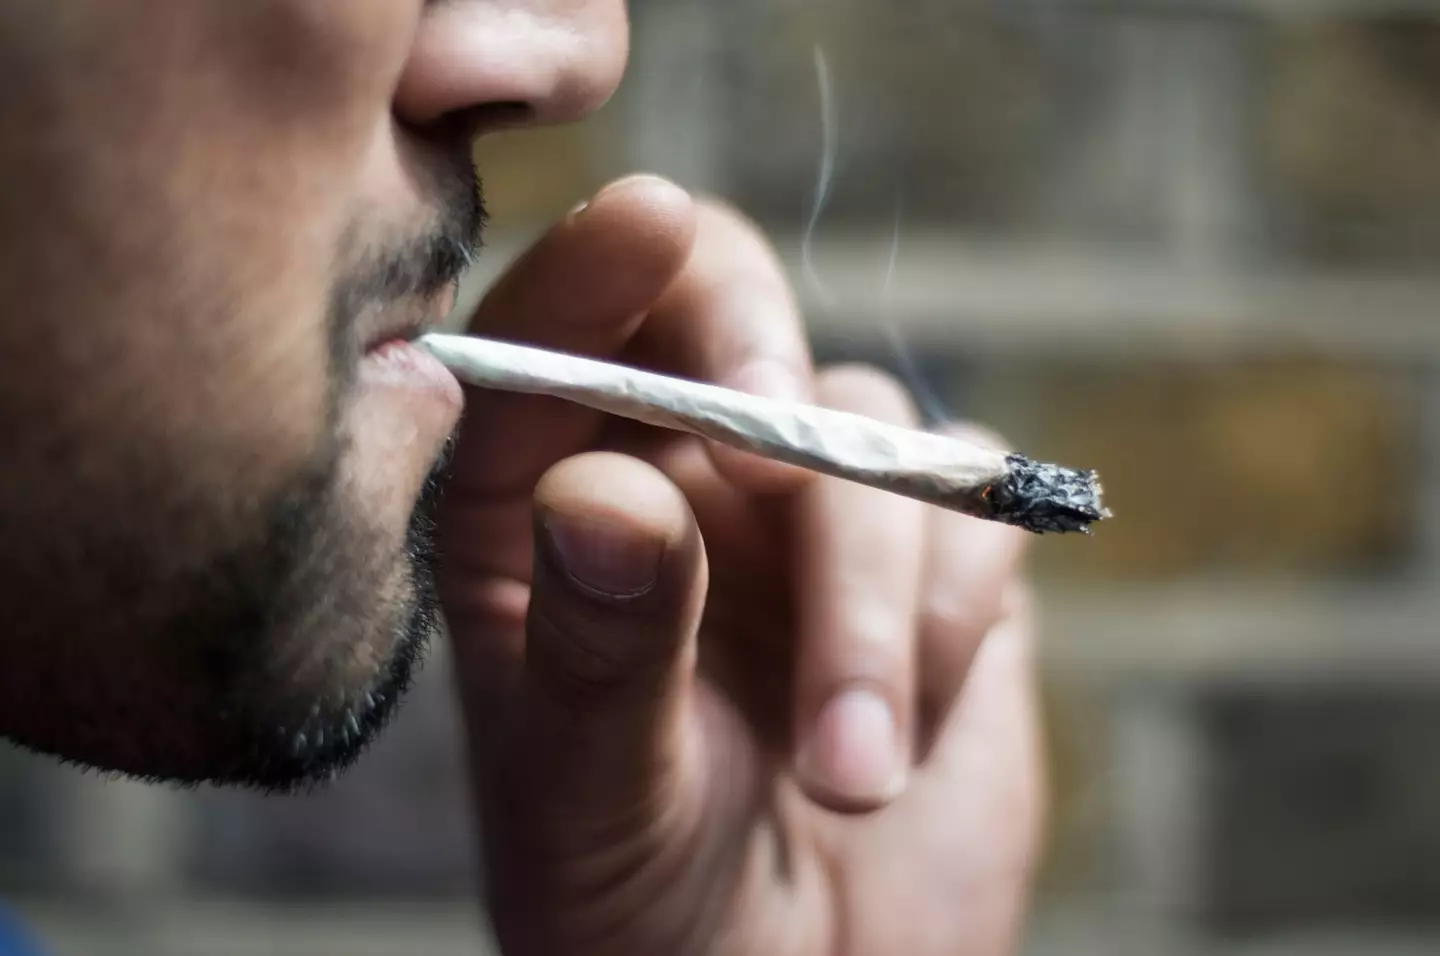 Proposals to legalise marijuana were opposed most by those who voted for the Conservatives in 2019.